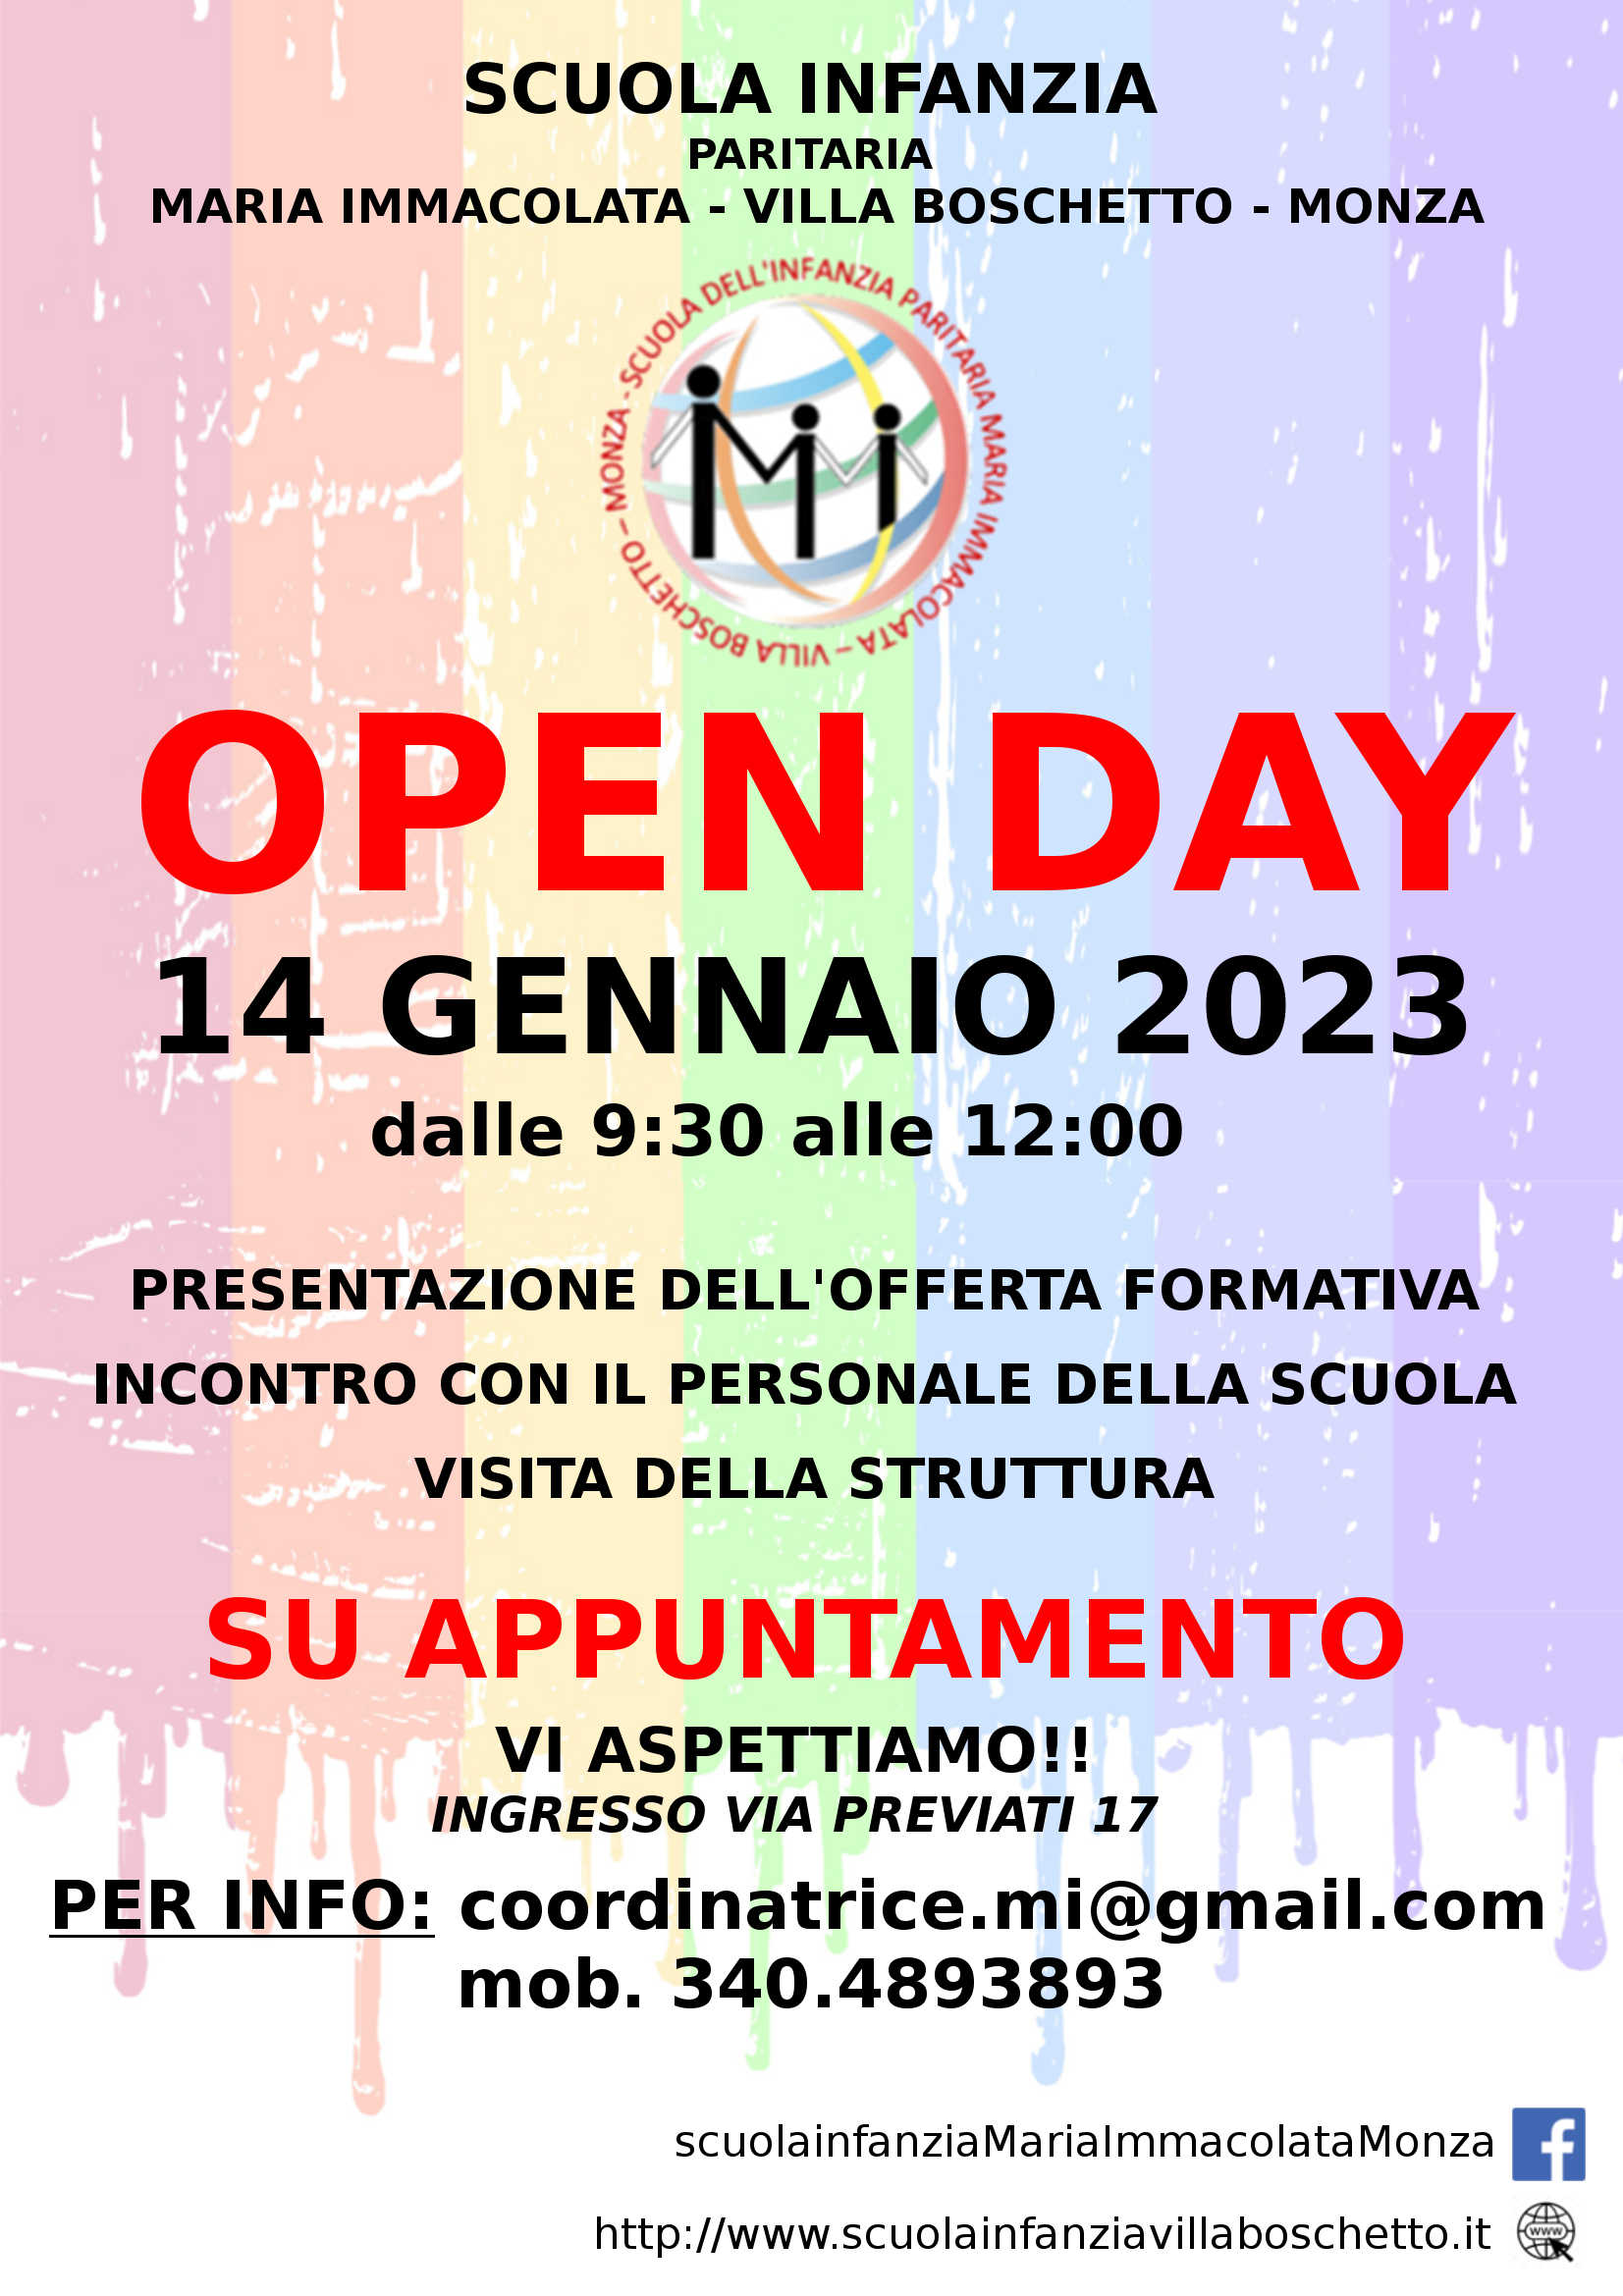 OPENDAY 14.01.2023